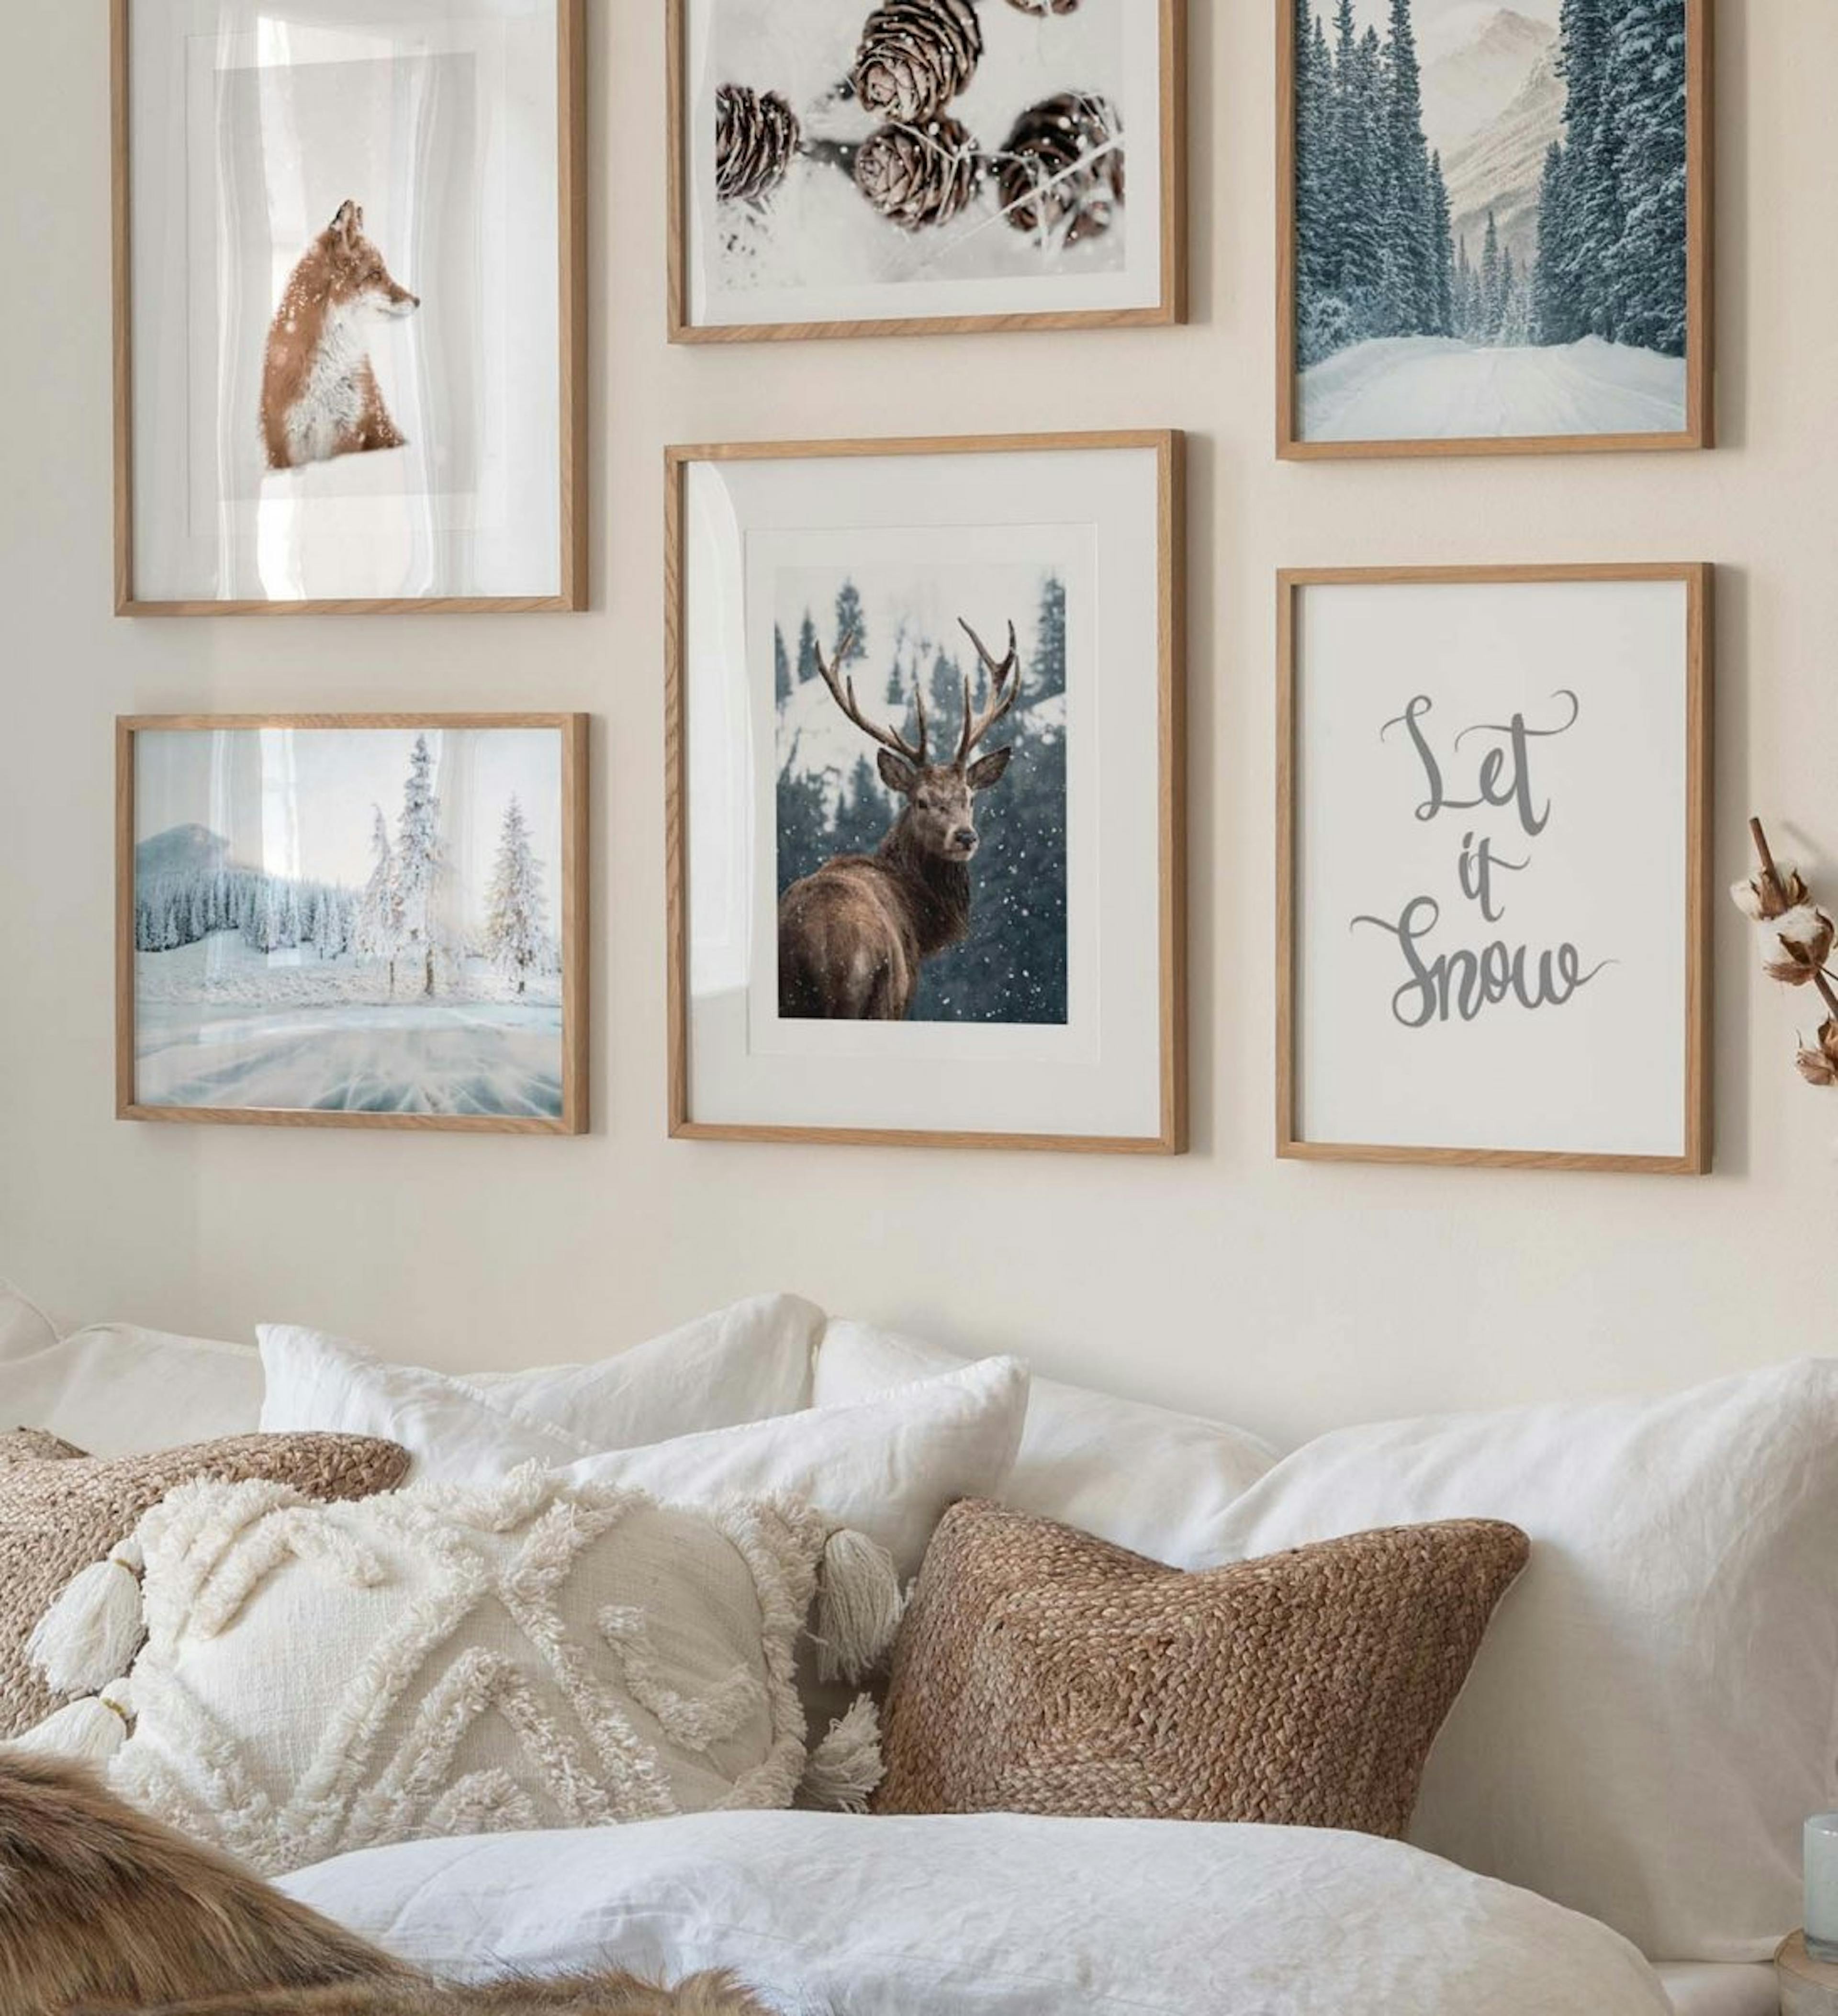 Gallery wall with winter posters of cones, a fox and a red deer combined with nature winter photographs and quote prints with oa